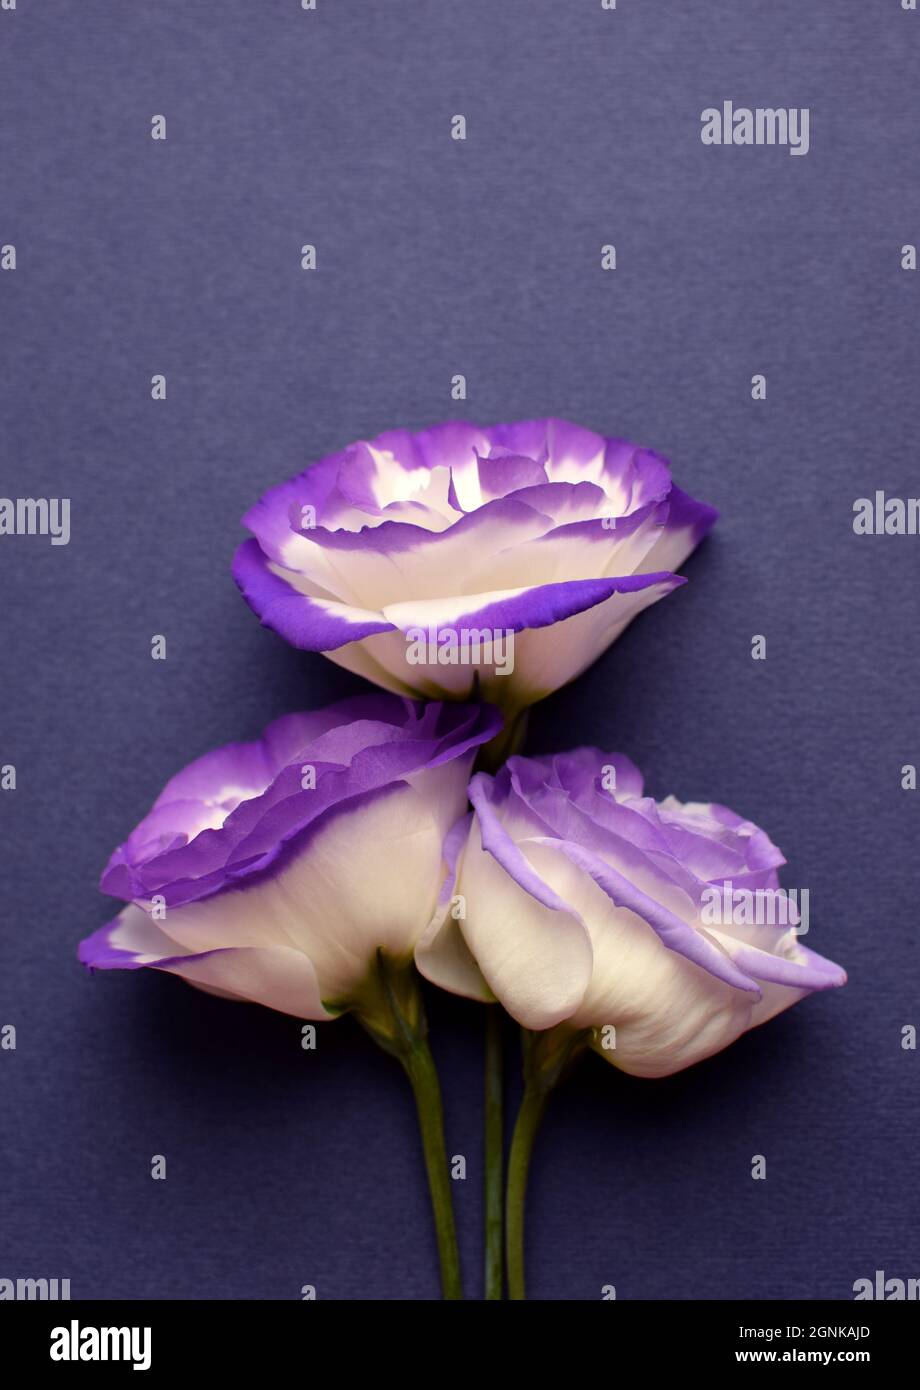 Beautiful white-purple eustoma (lisianthus) flowers in full bloom. Bouquet of flowers on a grey background. Stock Photo